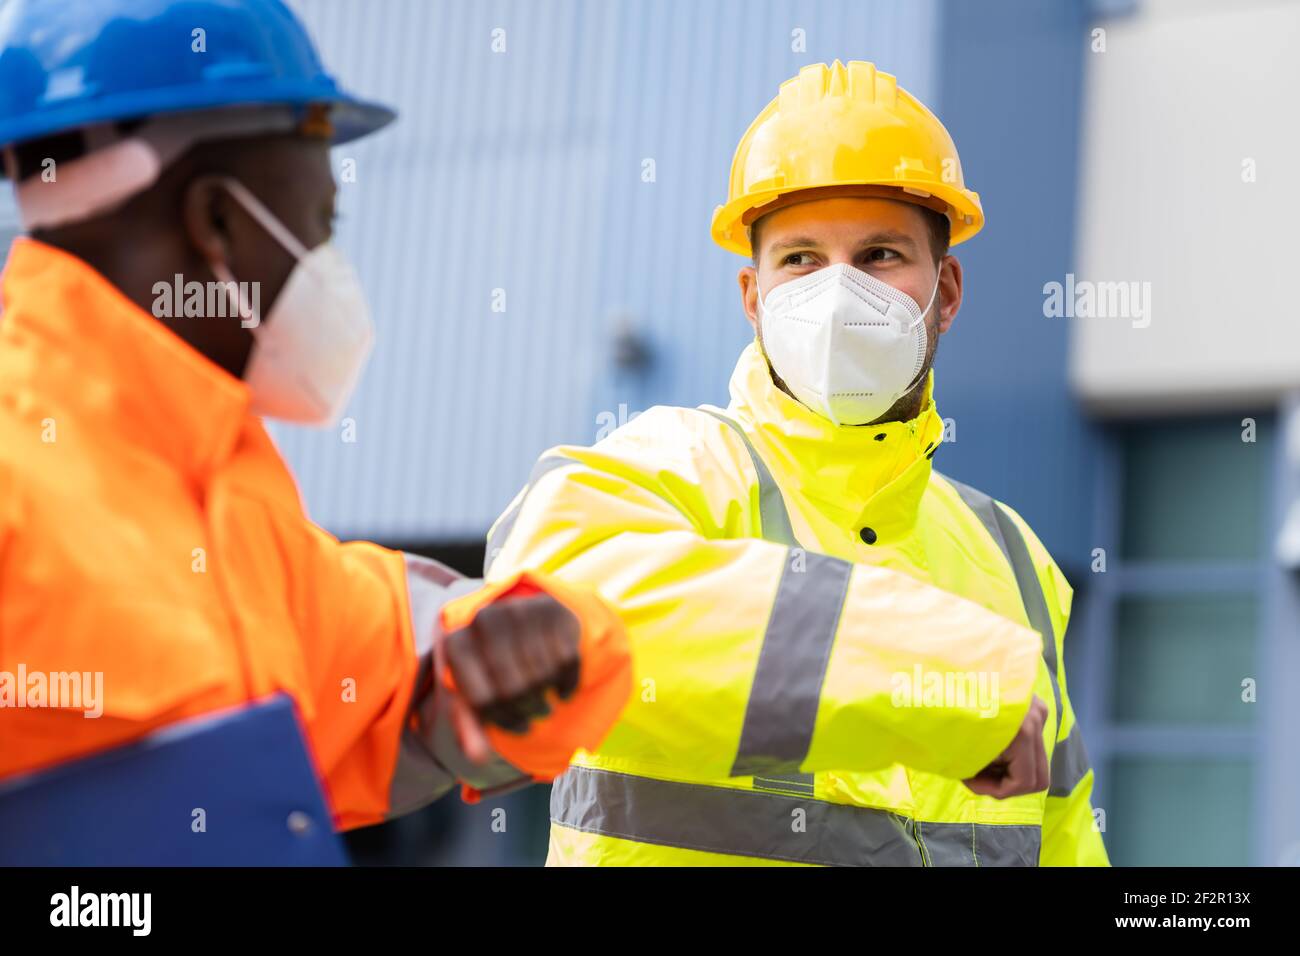 Construction Industry People Teamwork Elbow Bump Greeting Stock Photo